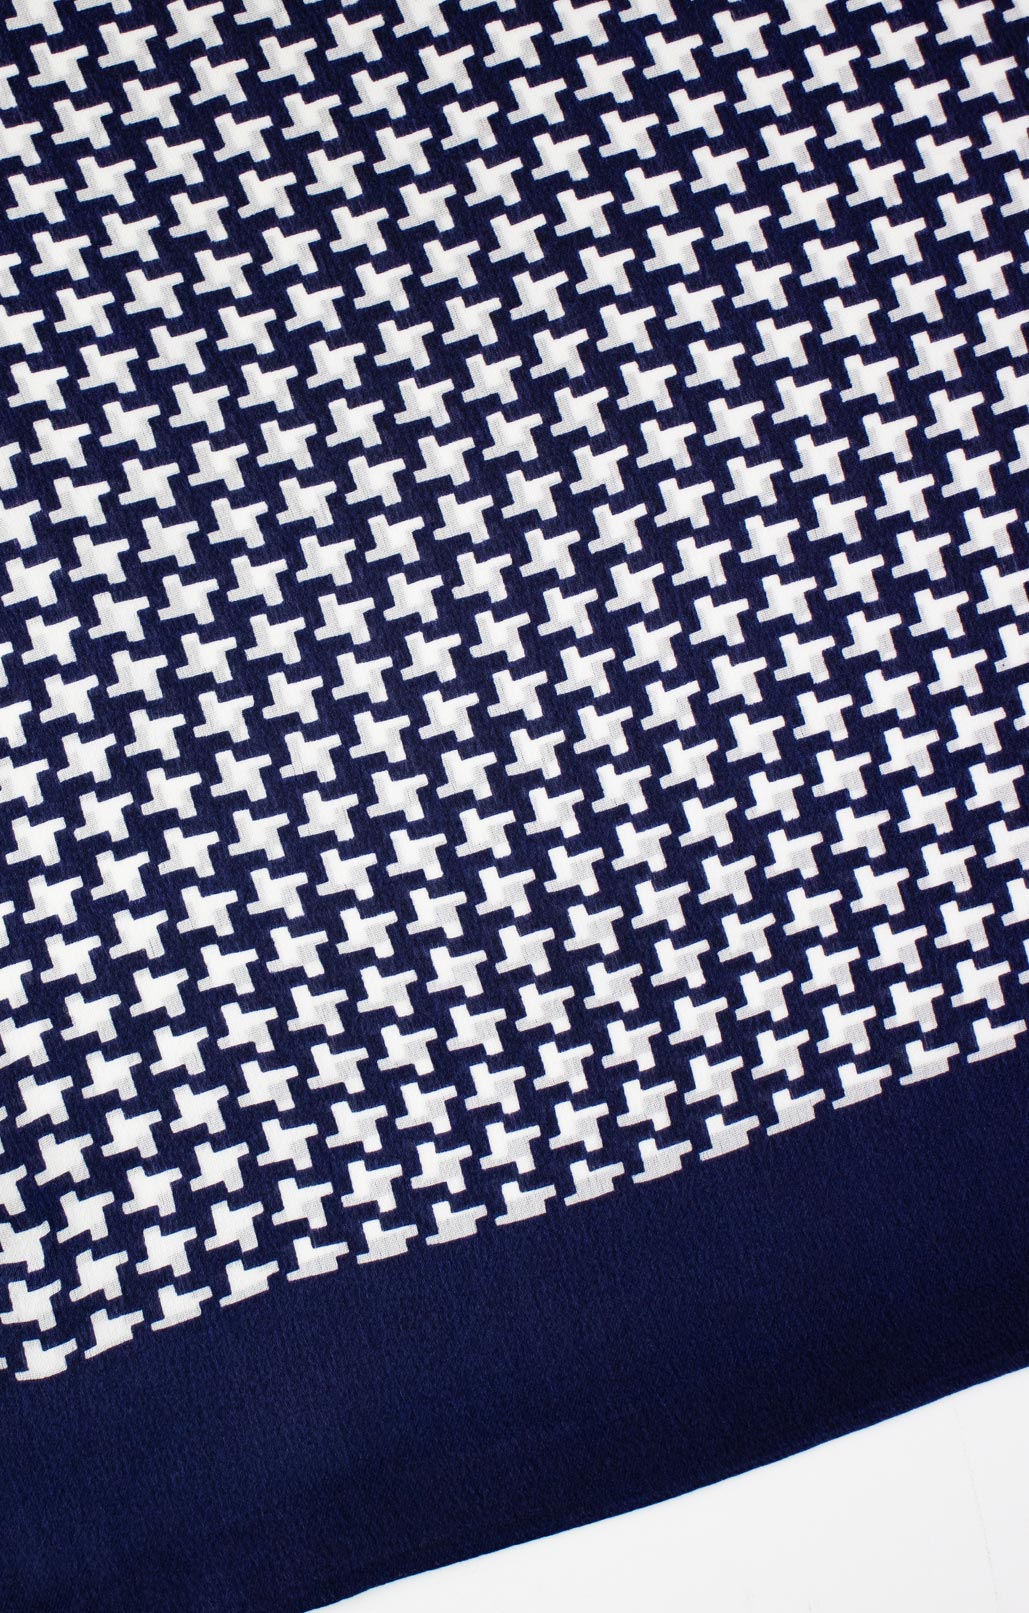 Double-Sided Silk Scarf, Navy Blue Patterned